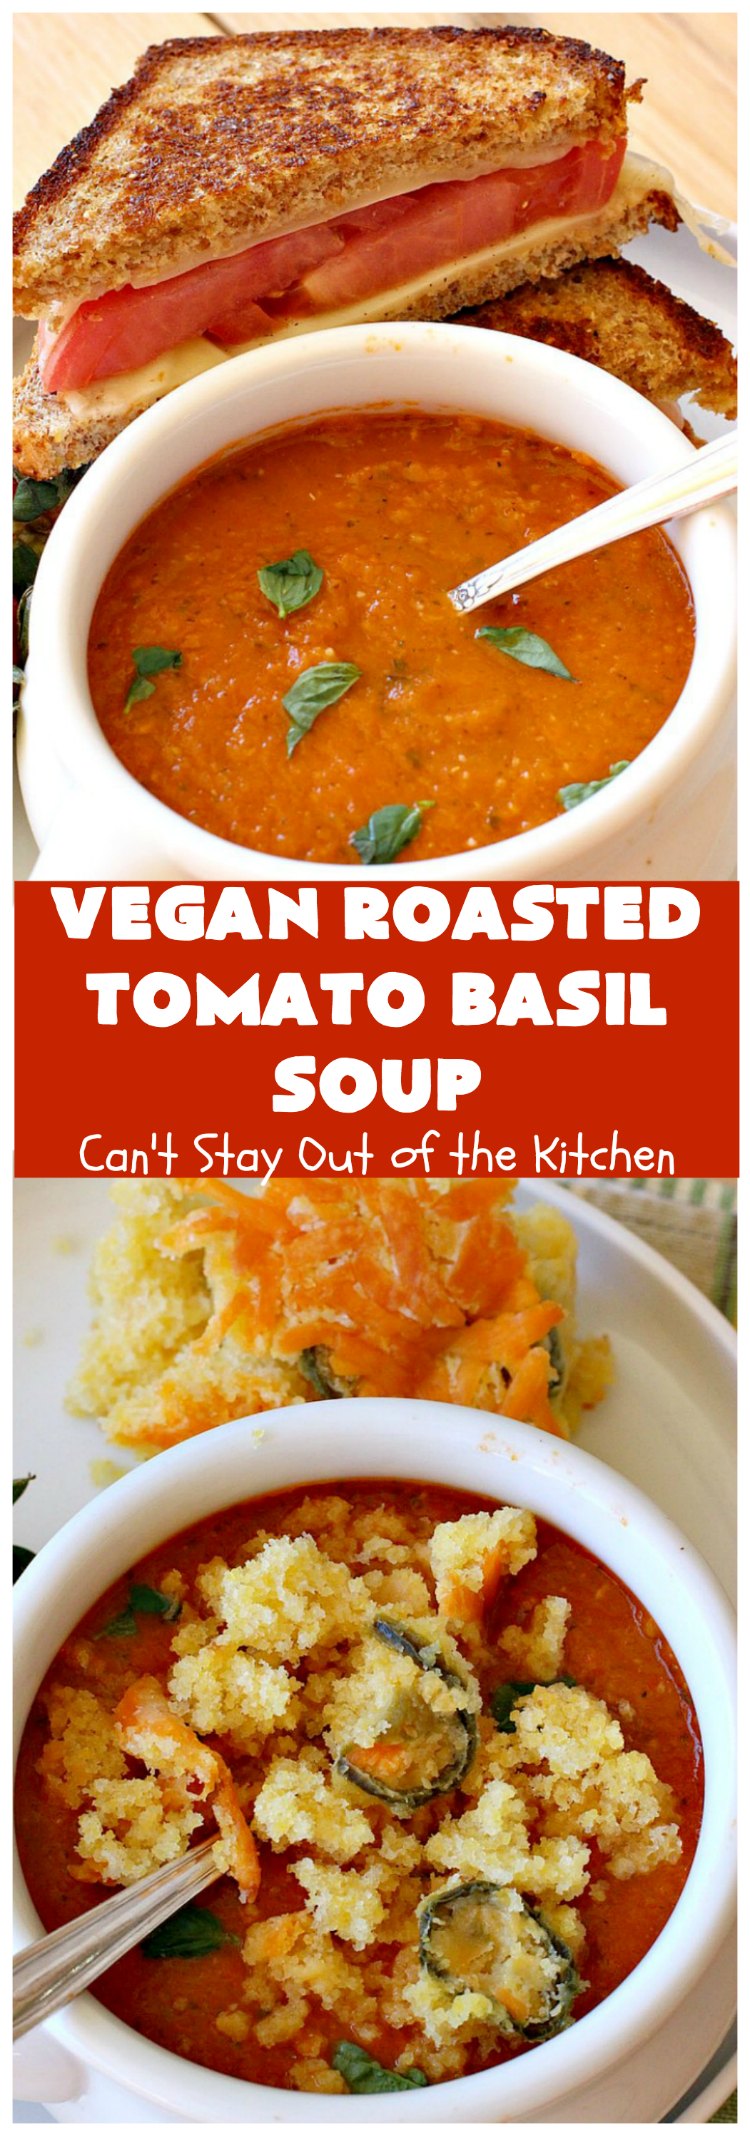 Vegan Roasted Tomato Basil Soup | Can't Stay Out of the Kitchen